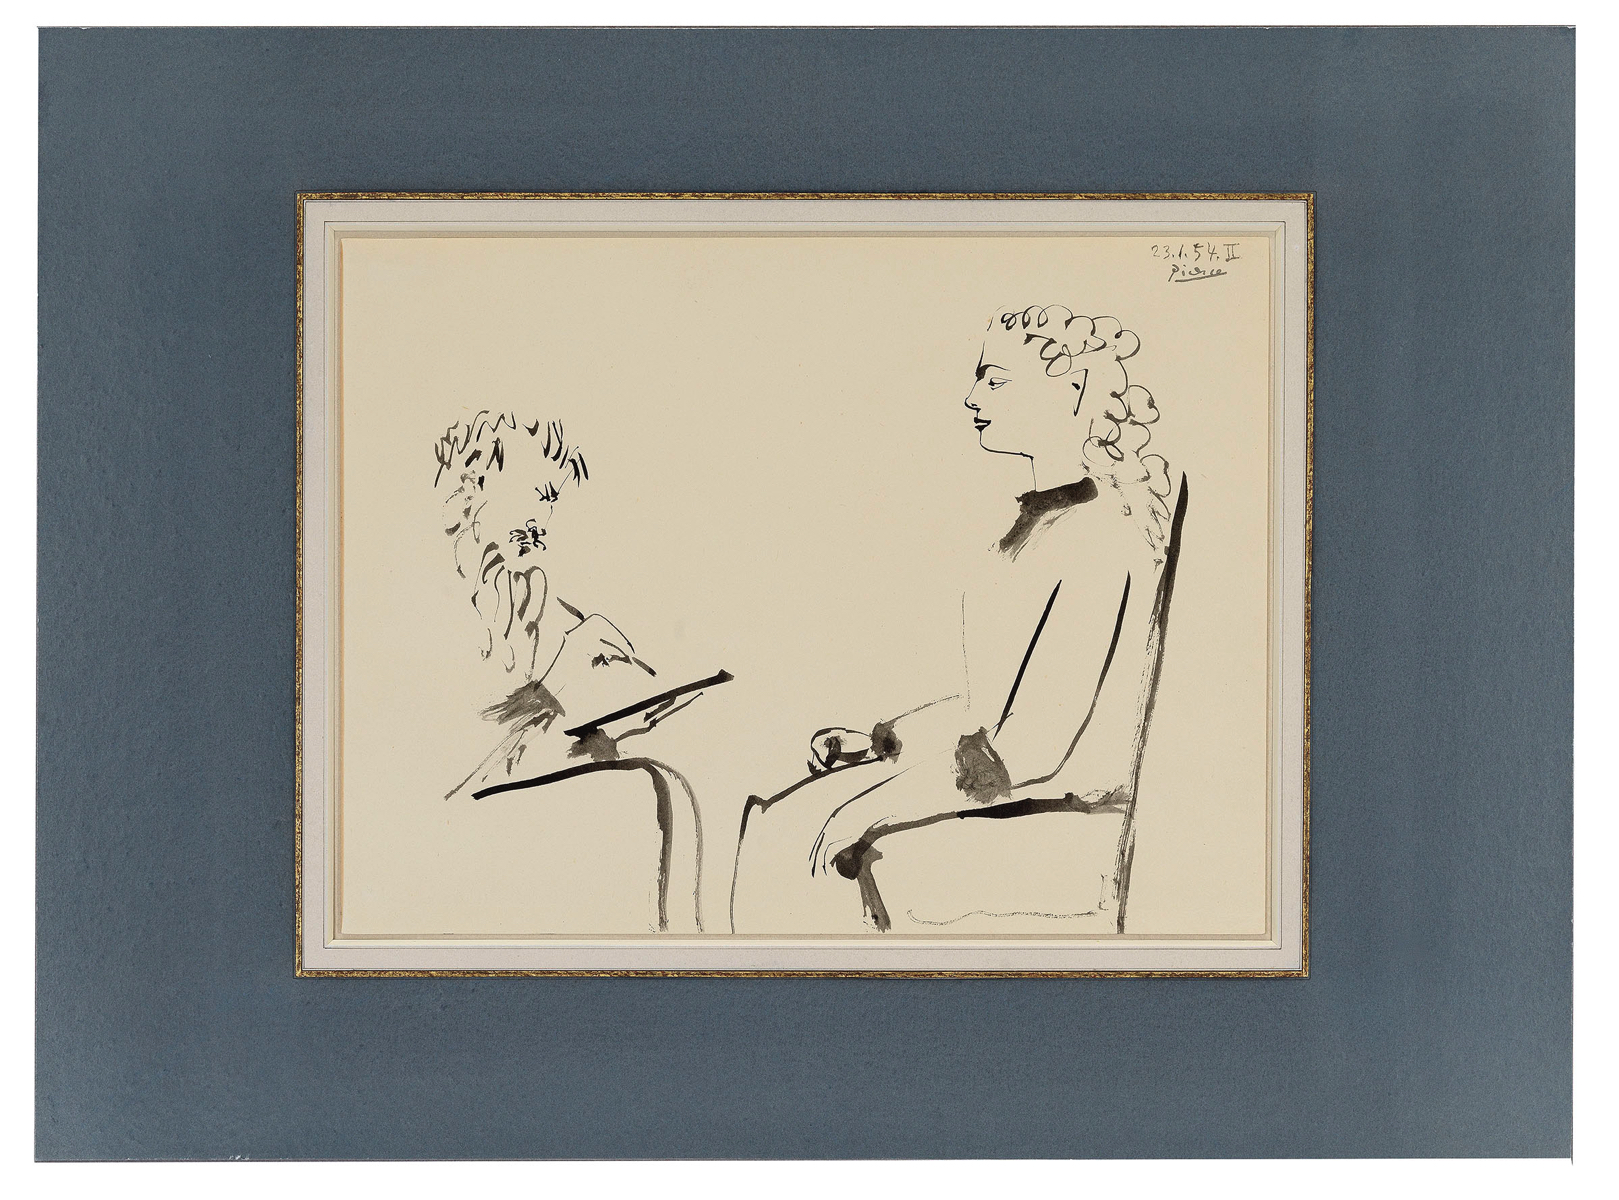 PABLO PICASSO (1881-1973)                                                                                                   Ink wash on paper24 x 32 cmSigned and dated in ink: 23.1.54. II. Literature: Zervos Volume 16, 206.Provenance:   Galerie Louise Leiris, Paris (stock 06261)Herman C. Goldsmith, New YorkGBP 210,000 